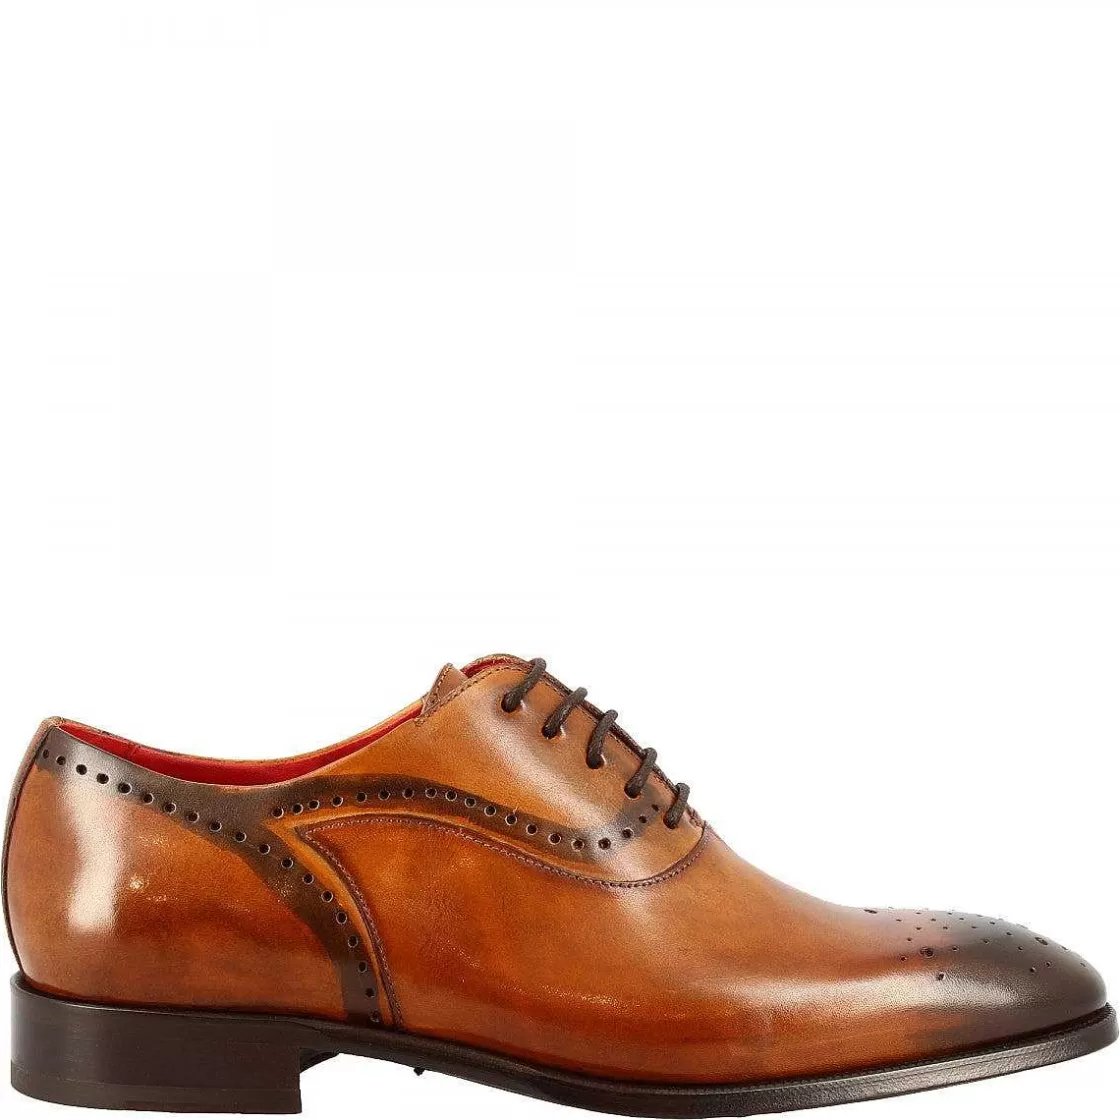 Leonardo Handmade Men'S Oxford Shoes With Square Toe In Faded Siena Leather Online